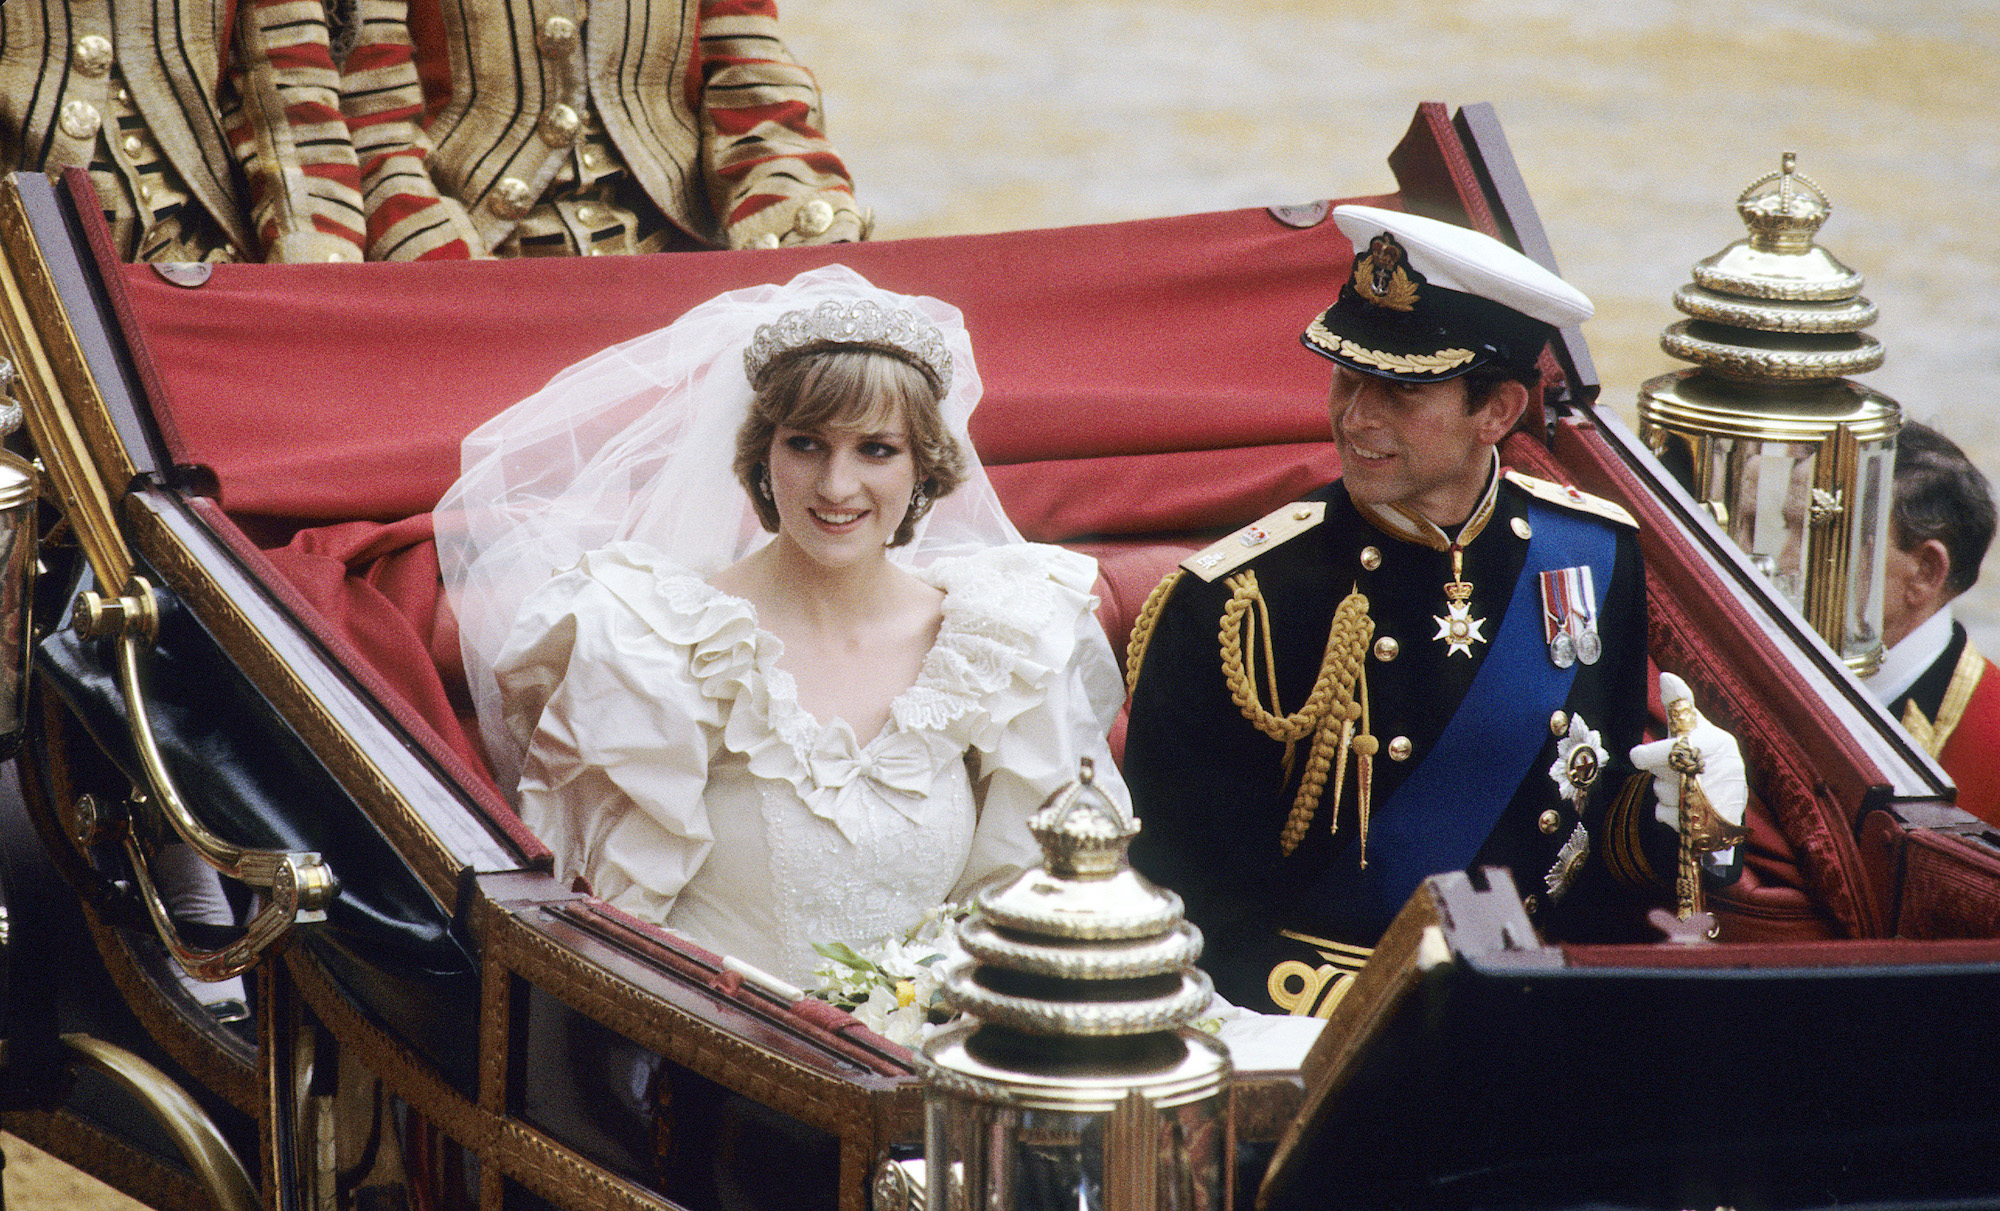 Princess Diana and Prince Charles ride in a carriage after their royal wedding